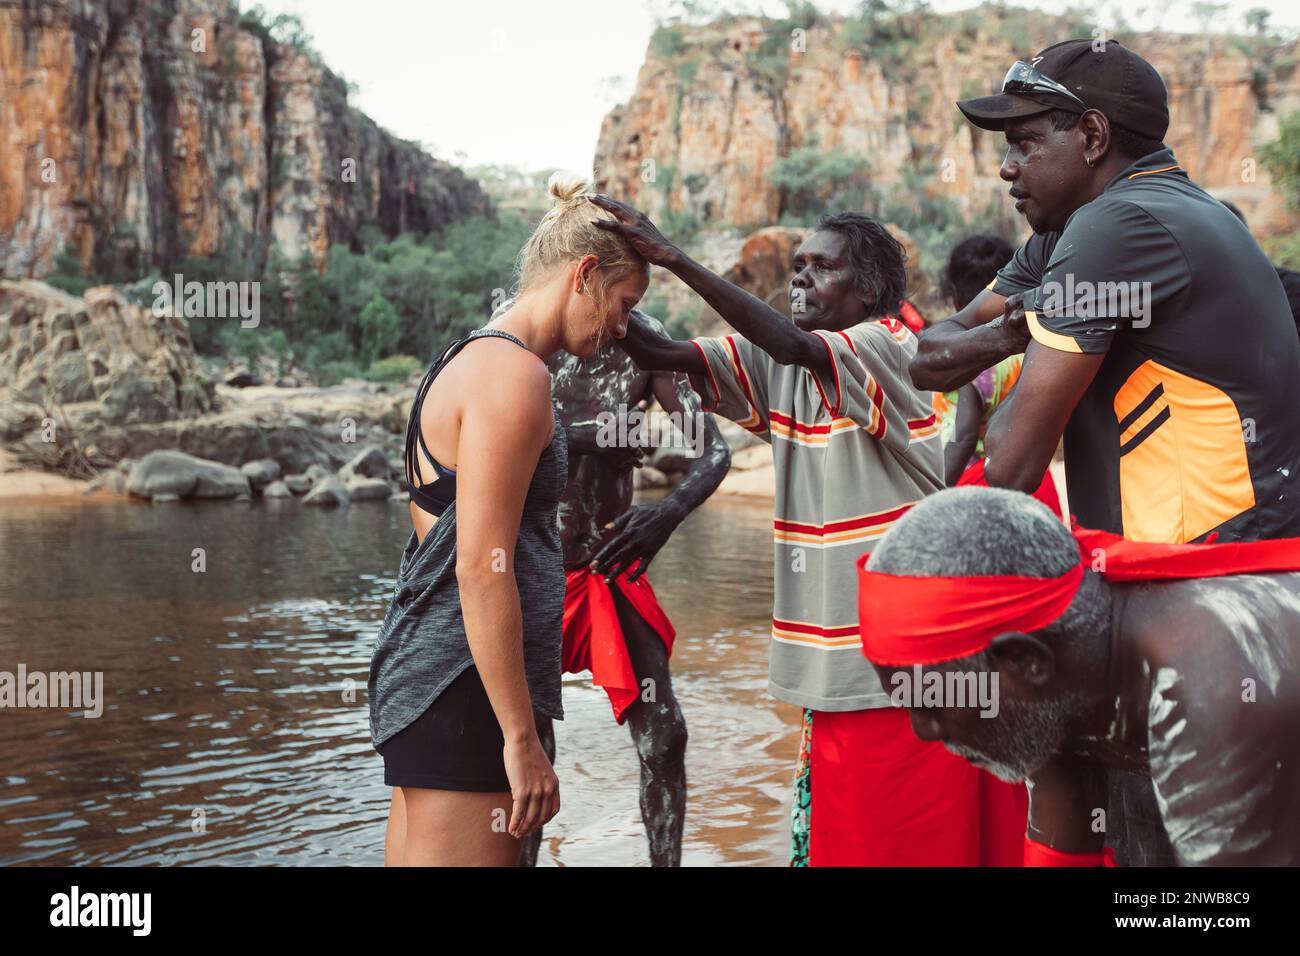 Rhiannan Iffland has gone back to her roots by from heady heights into crocodile-infested waters in her native Australia. The three-time Red Bull Cliff Diving launched herself off some previously